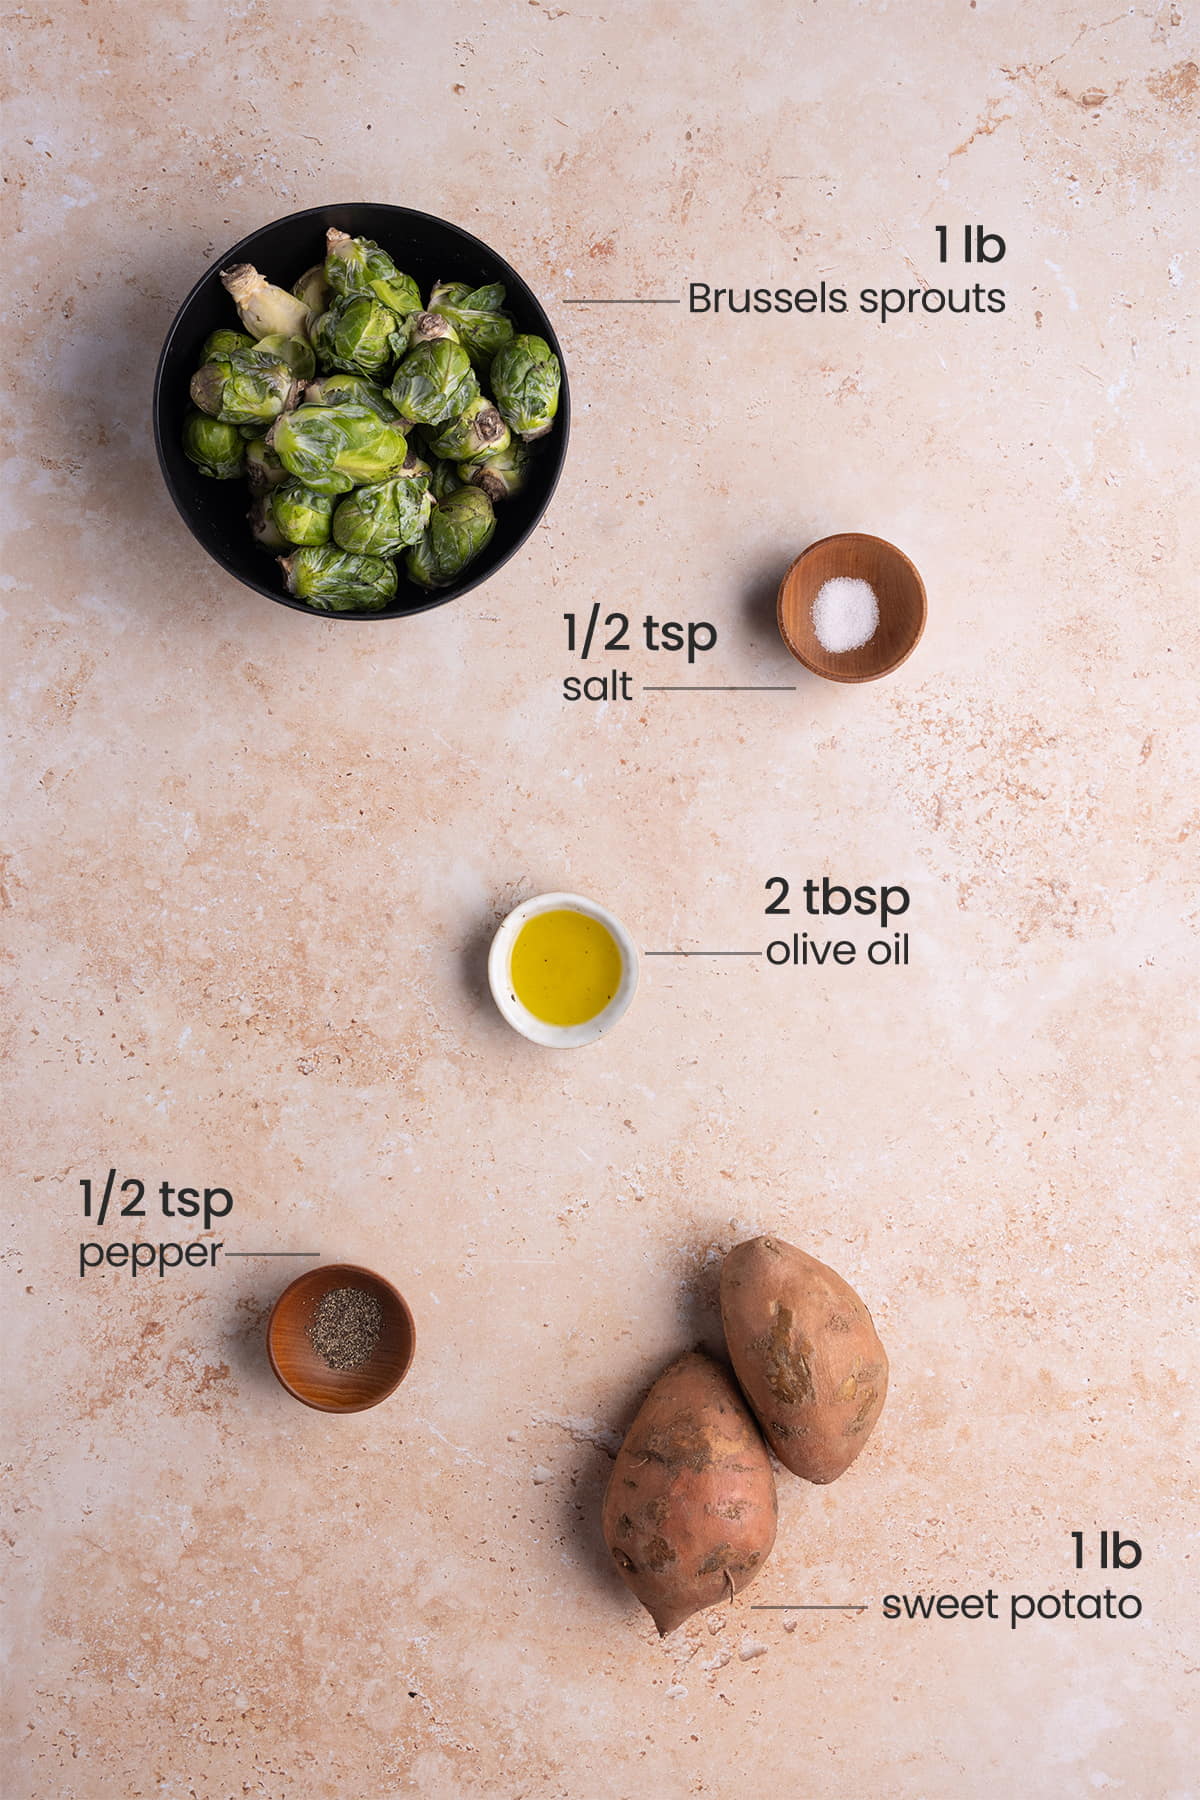 ingredients for roasted Brussels sprouts and sweet potatoes - Brussels sprouts, salt, olive oil, pepper, sweet potato